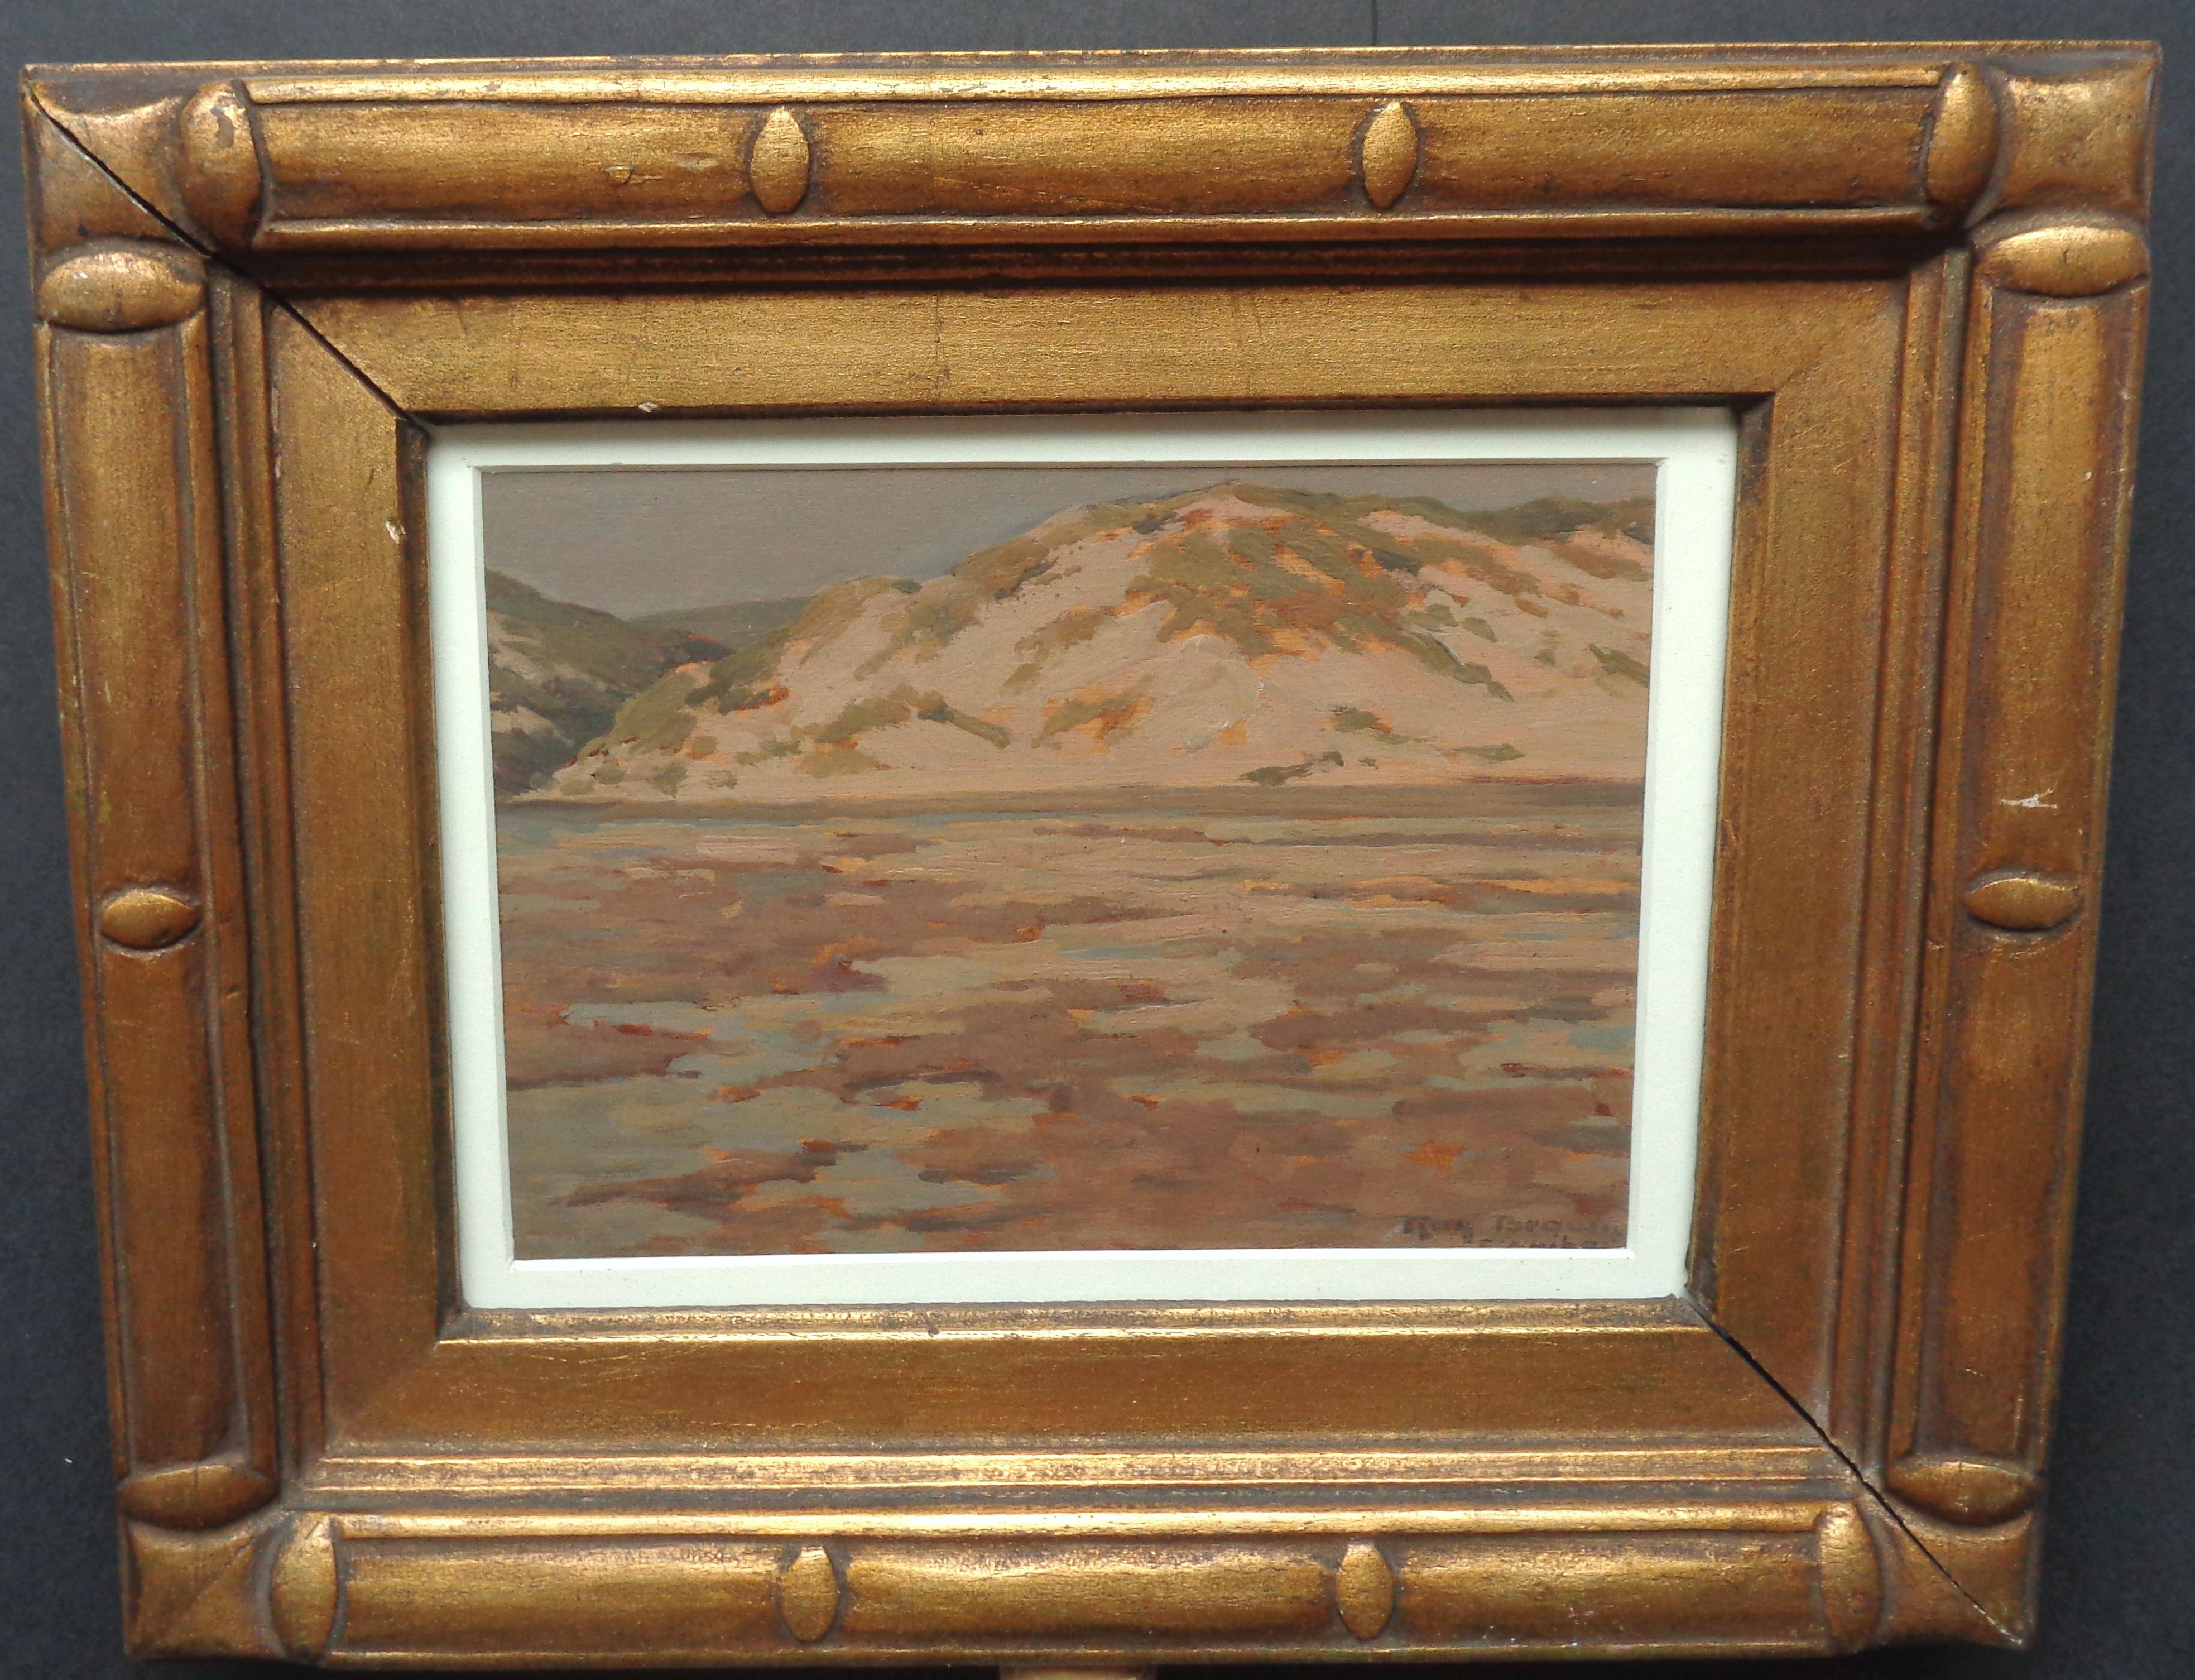 An oil painting on panel by artist Roy Henry Brown possible western scene. Painting is under glass. The image measures sight size 5 x 7.25 and 10.25 x 12.50 framed as is. The painting looks very clean in original frame that shows age and wear with a